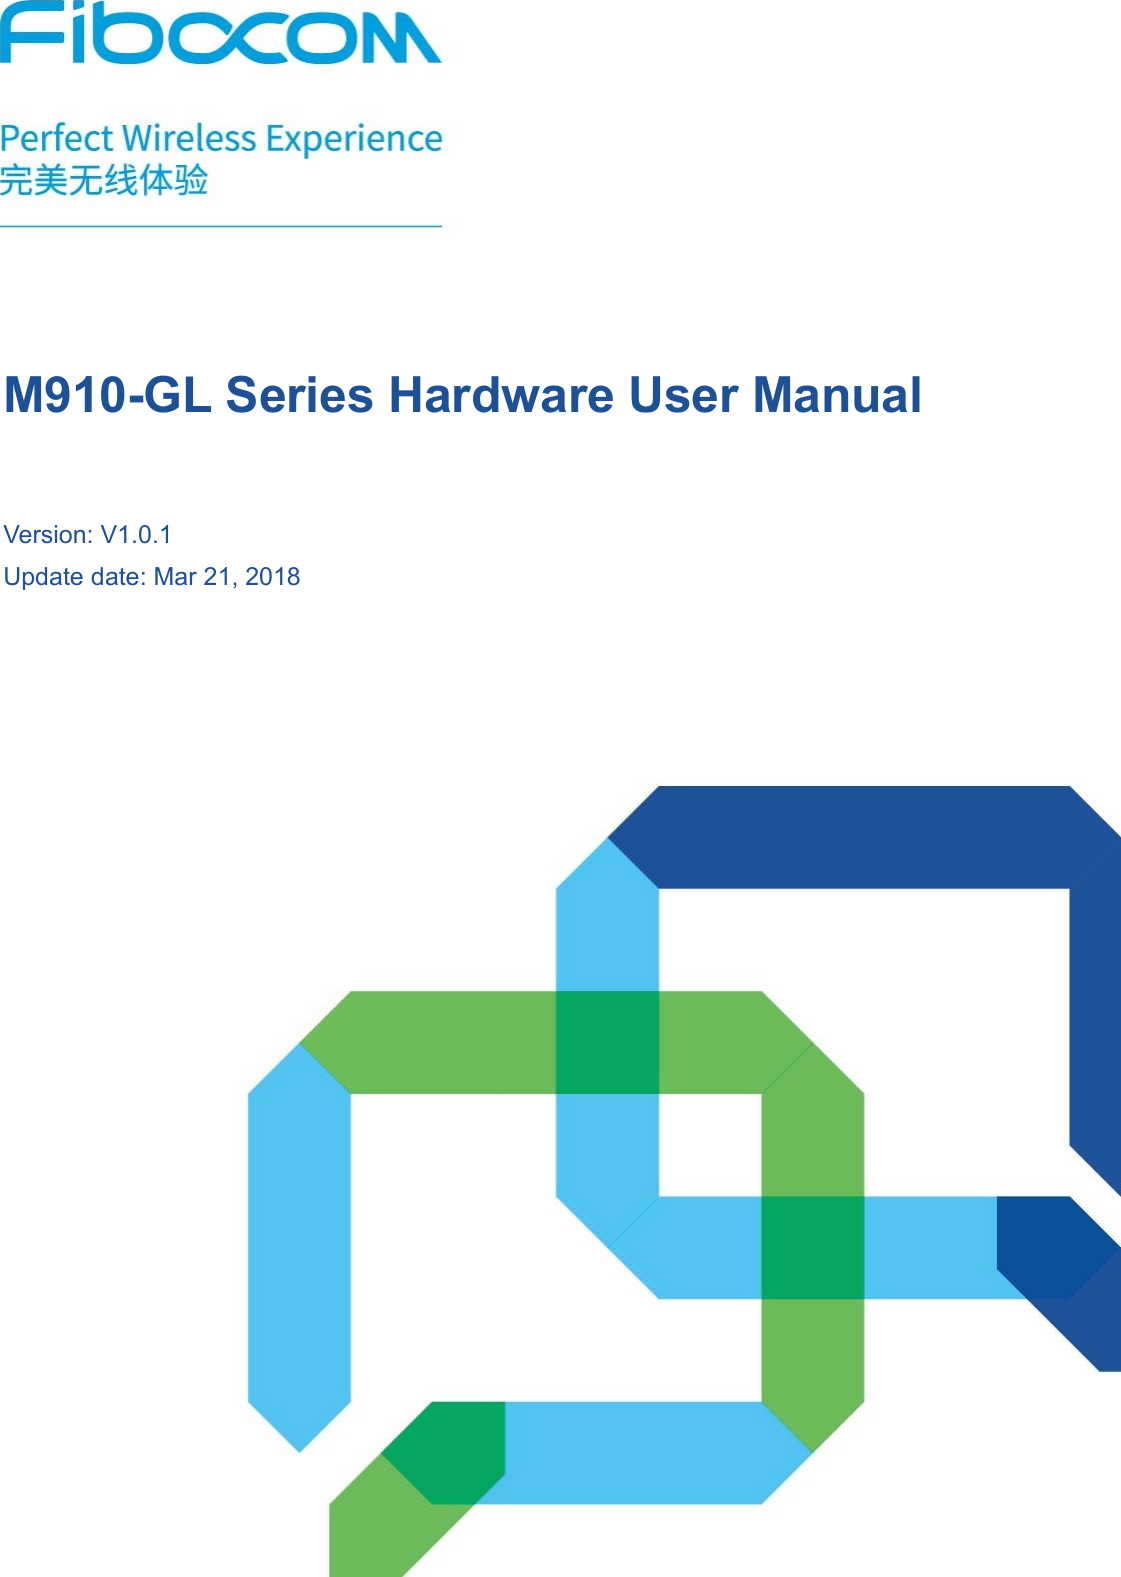  Reproduction forbidden without Fibocom Wireless Inc. written authorization - All Rights Reserved. M910-GL Hardware User Manual                                                                                                  Page 1 of 45    M910-GL Series Hardware User Manual   Version: V1.0.1 Update date: Mar 21, 2018 